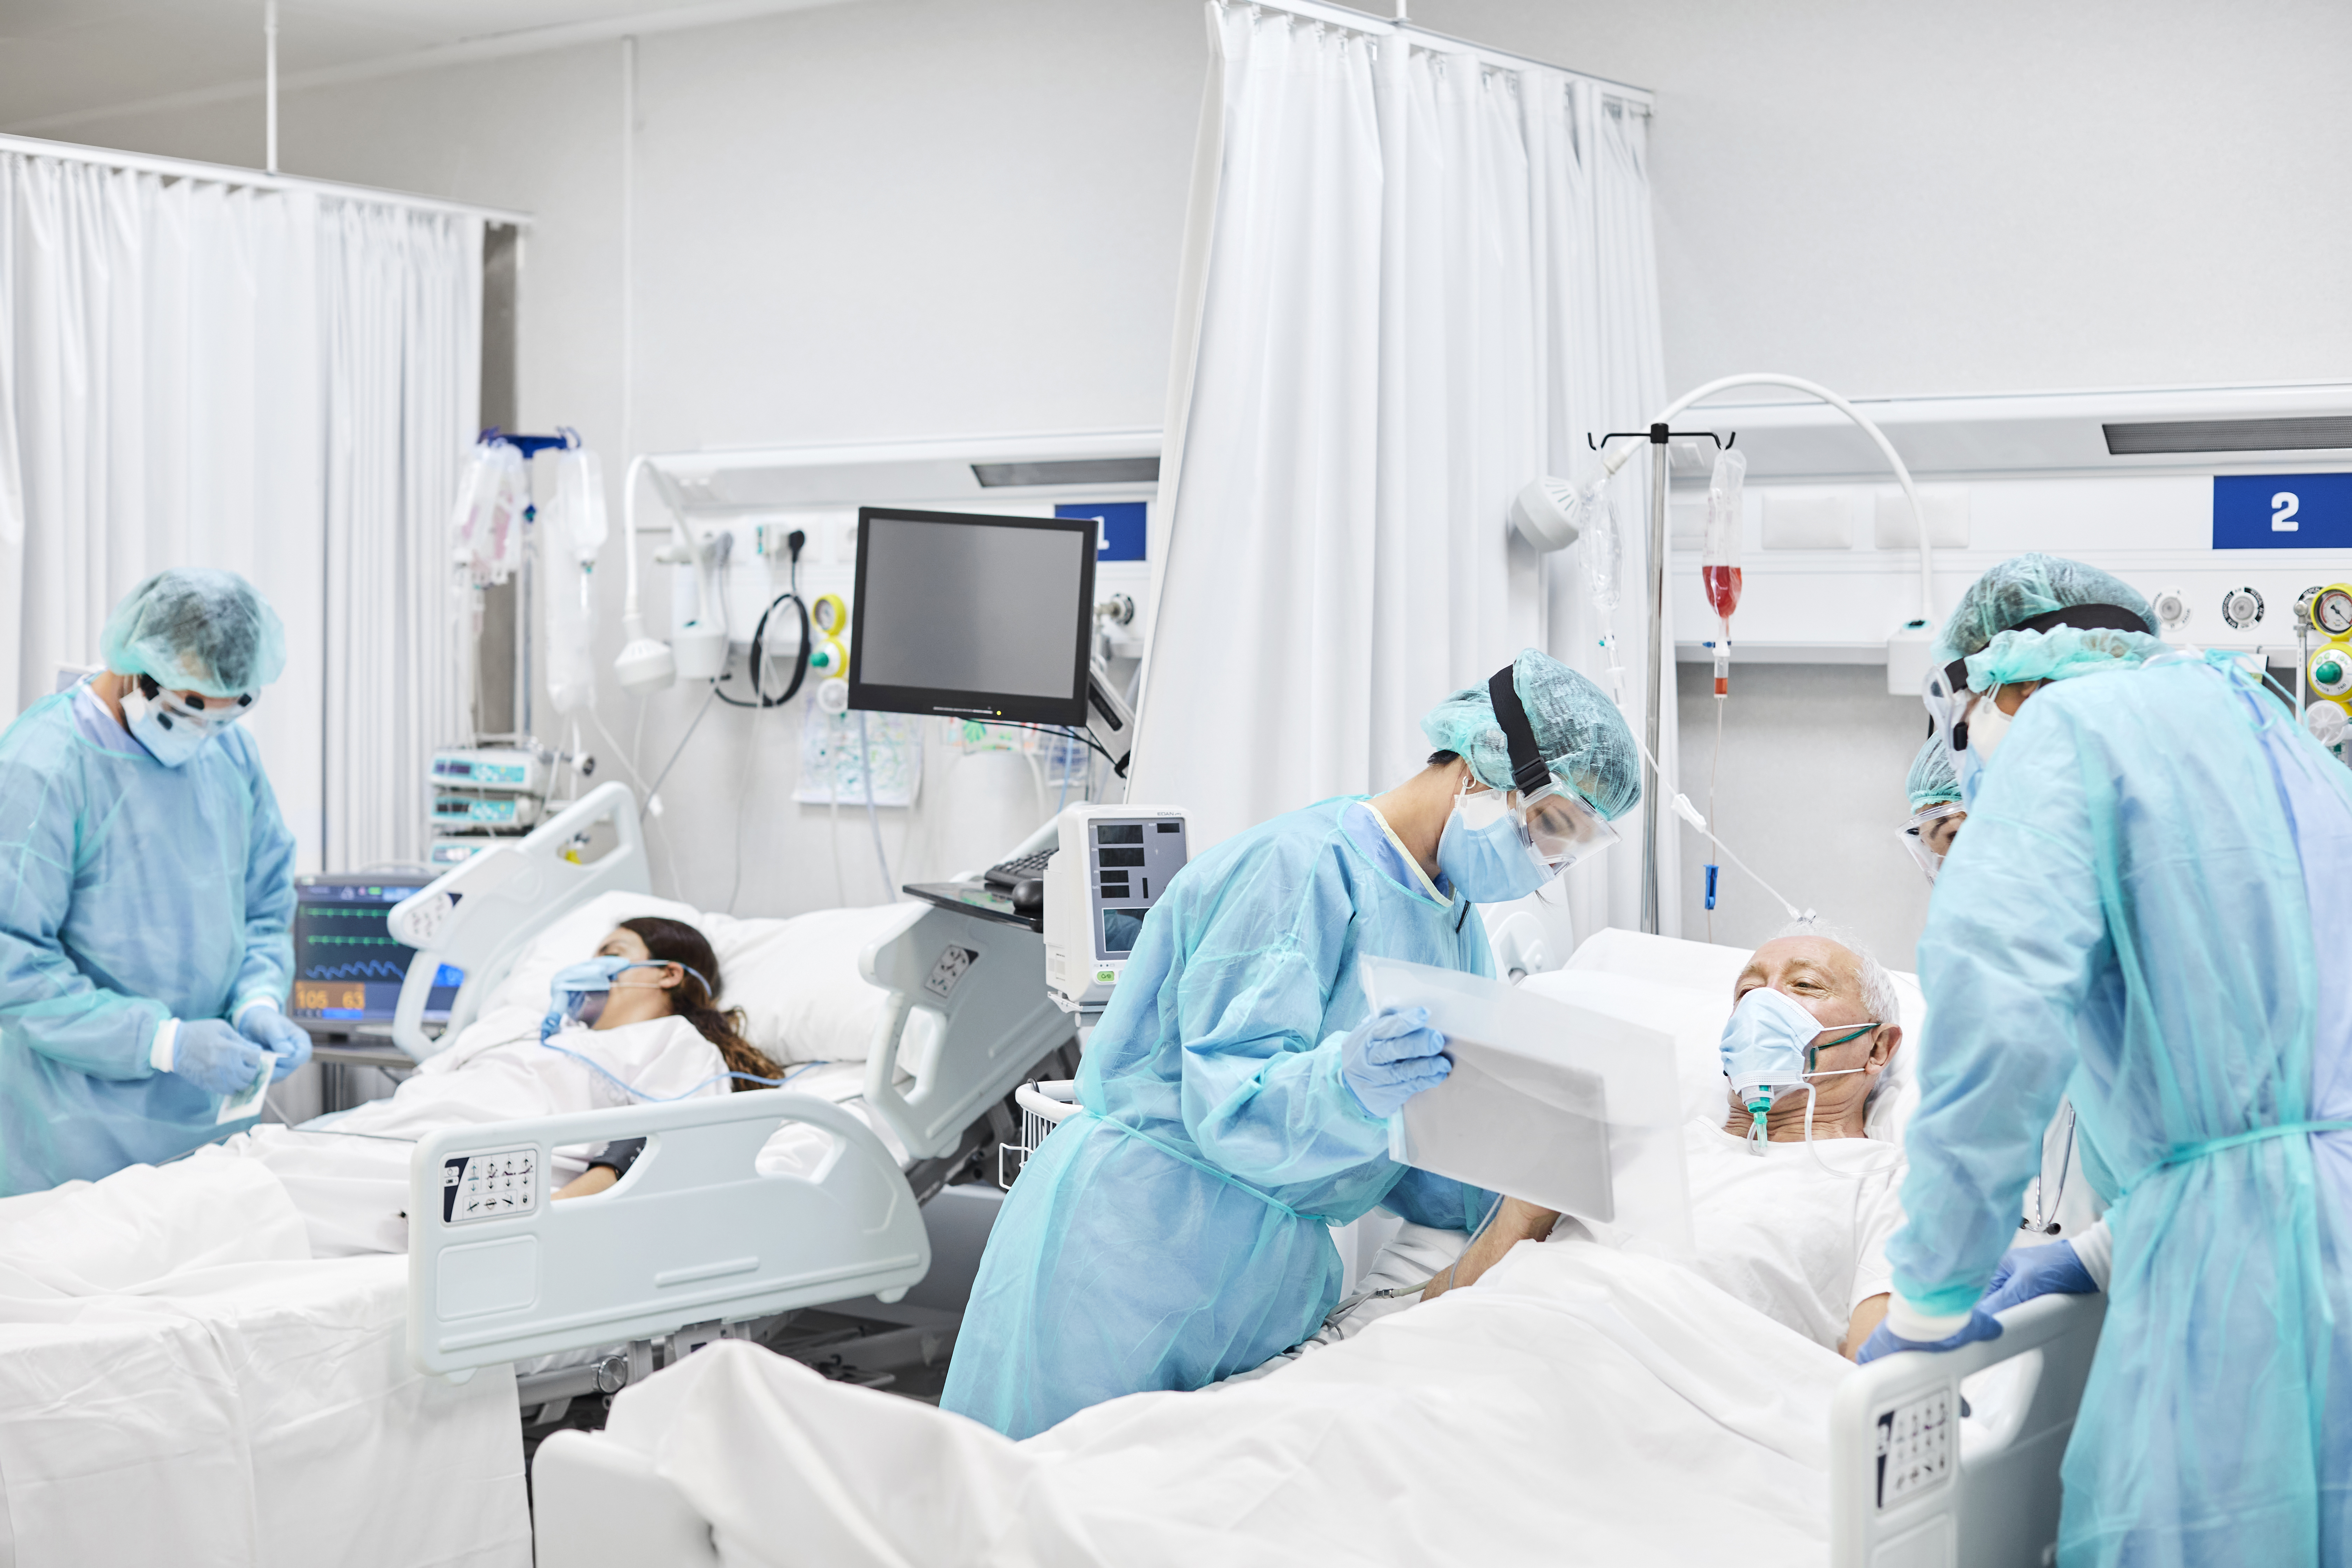 WellAir keeps healthcare facilities safe using patented NanoStrike technology.